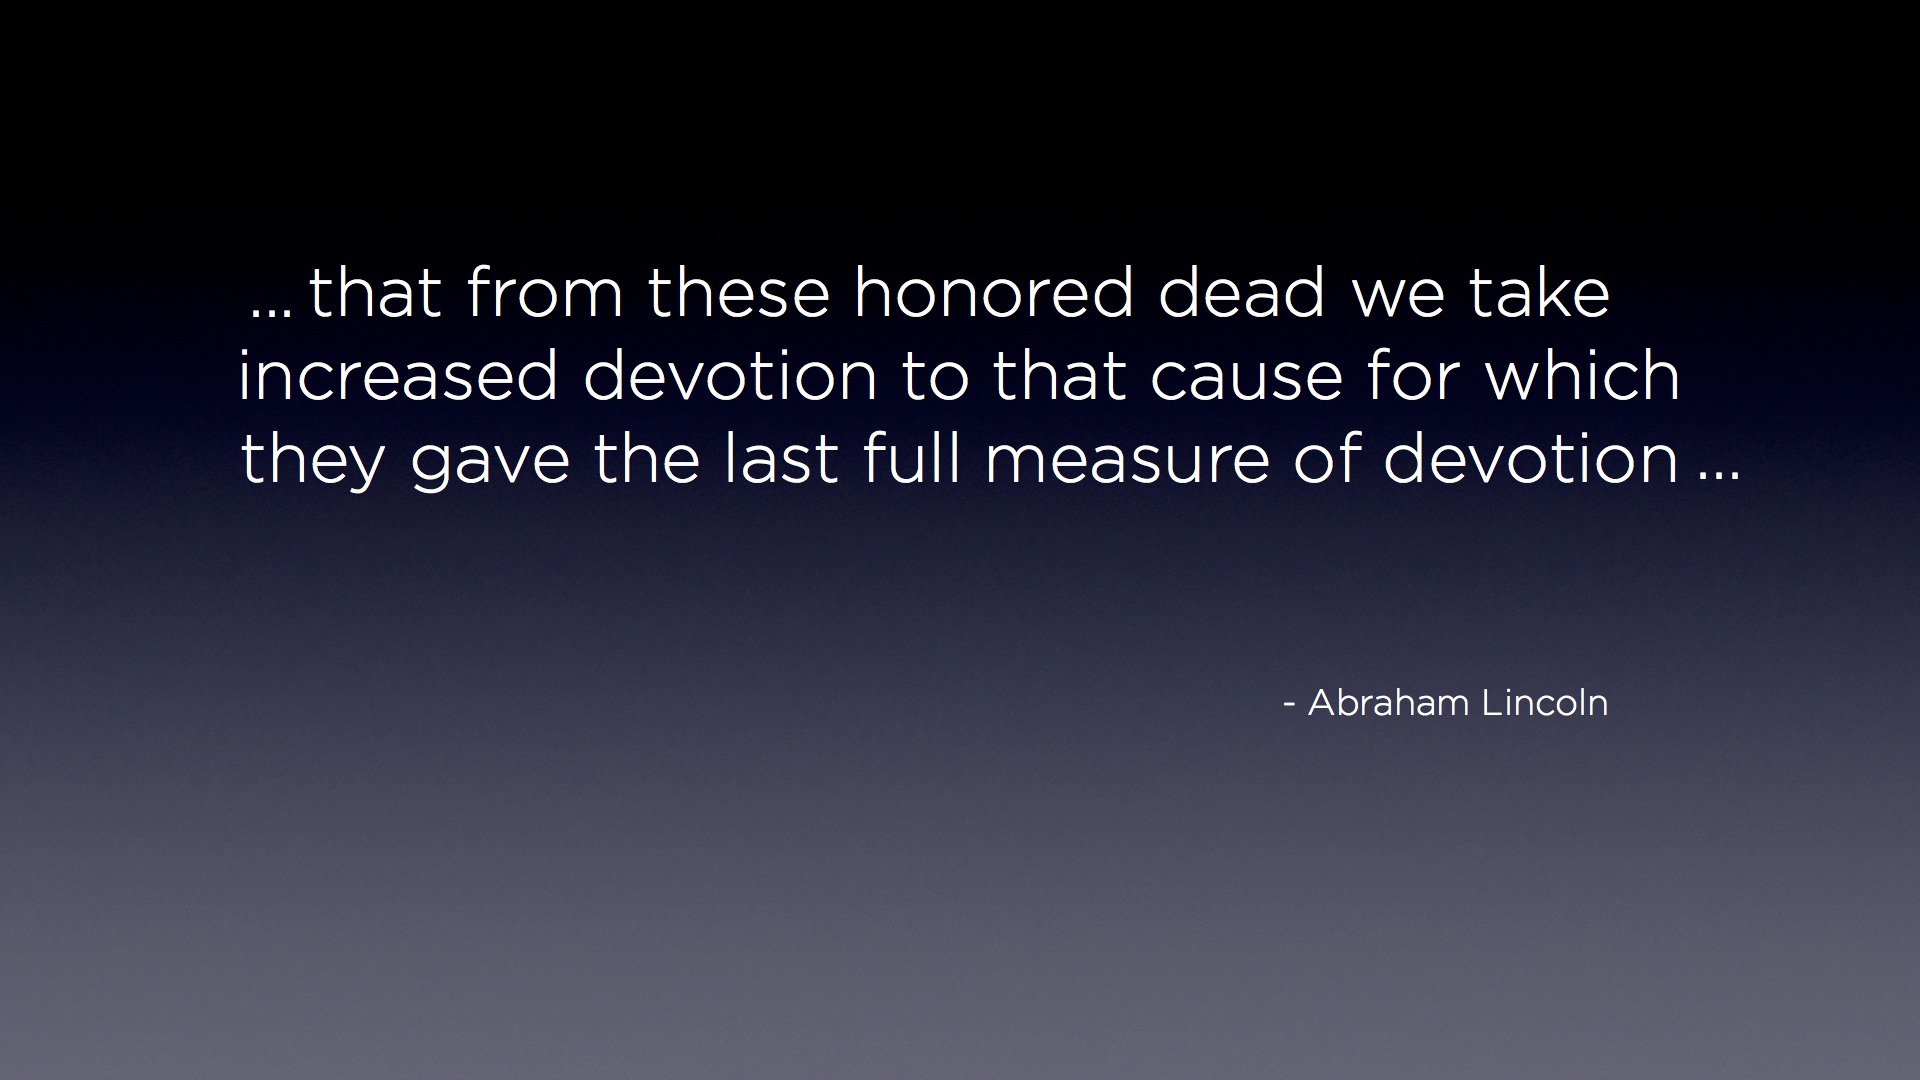 "... that from these honored dead we take increased devotion to that cause for which they gave the last full measure of devotion ..." - Abraham Lincoln Quote